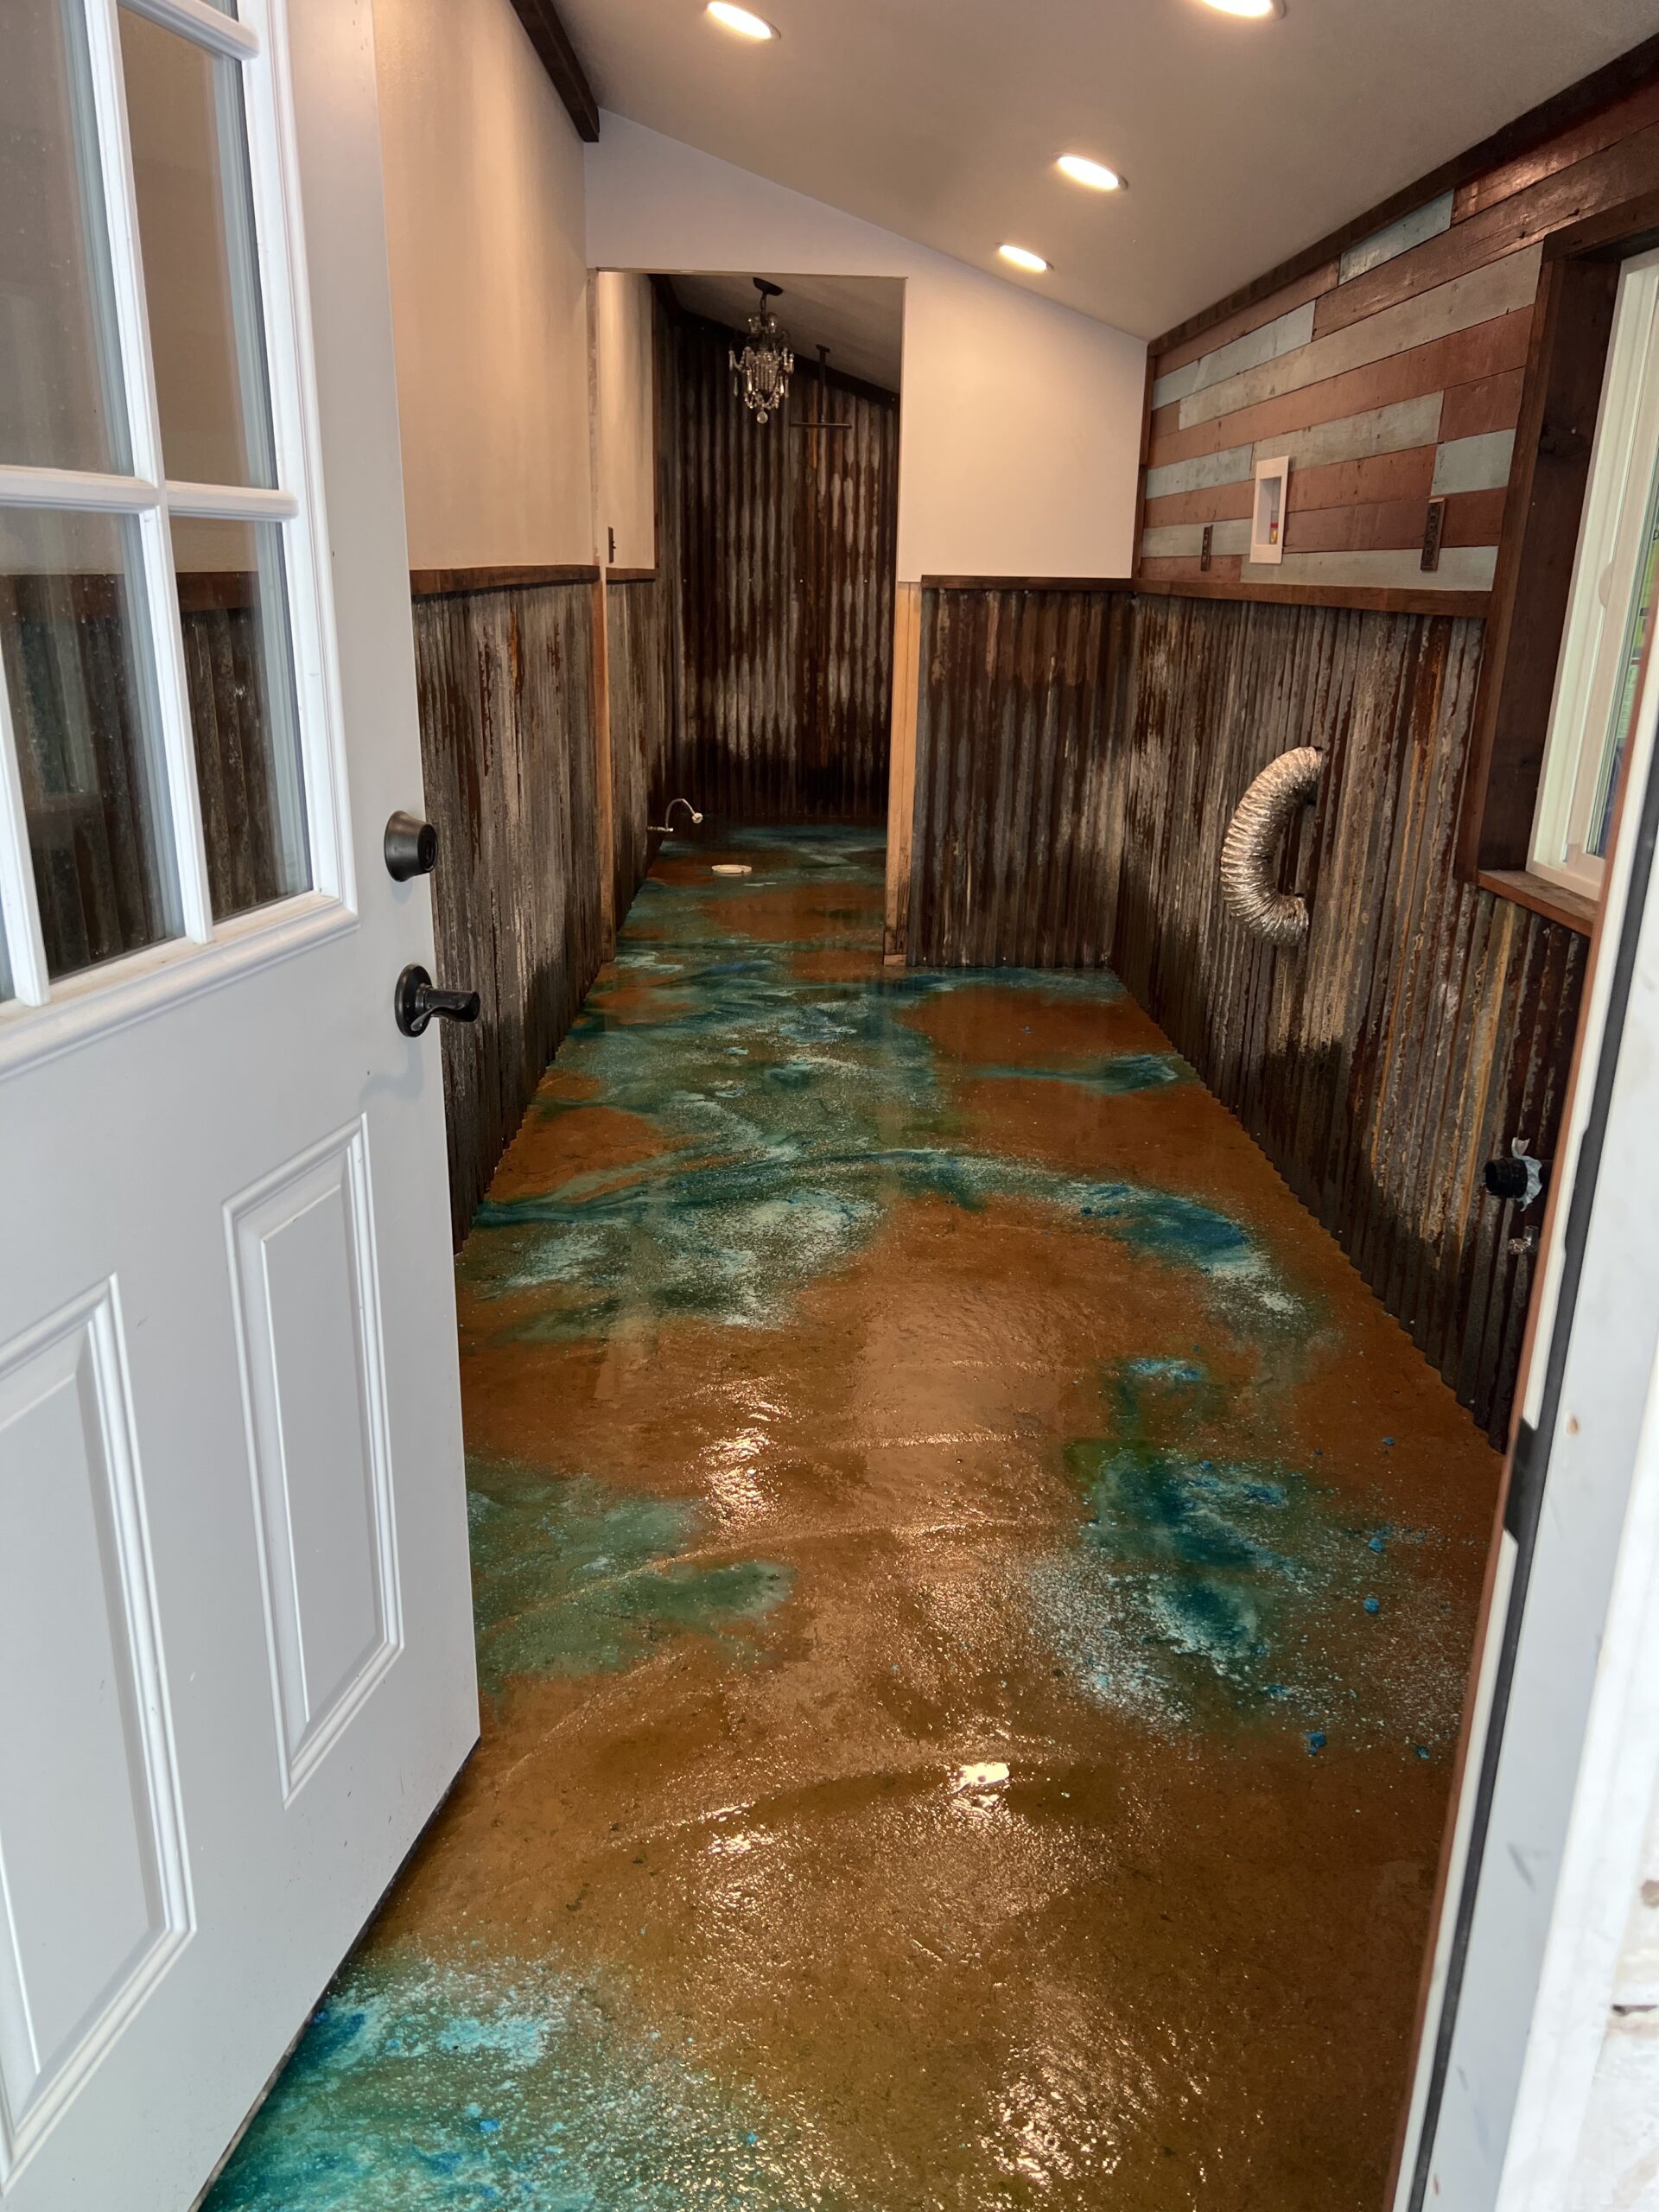 An 'after' image showing the dramatic transformation of the hallway flooring with deep reddish hues and star-like splatters of bright Azure Blue